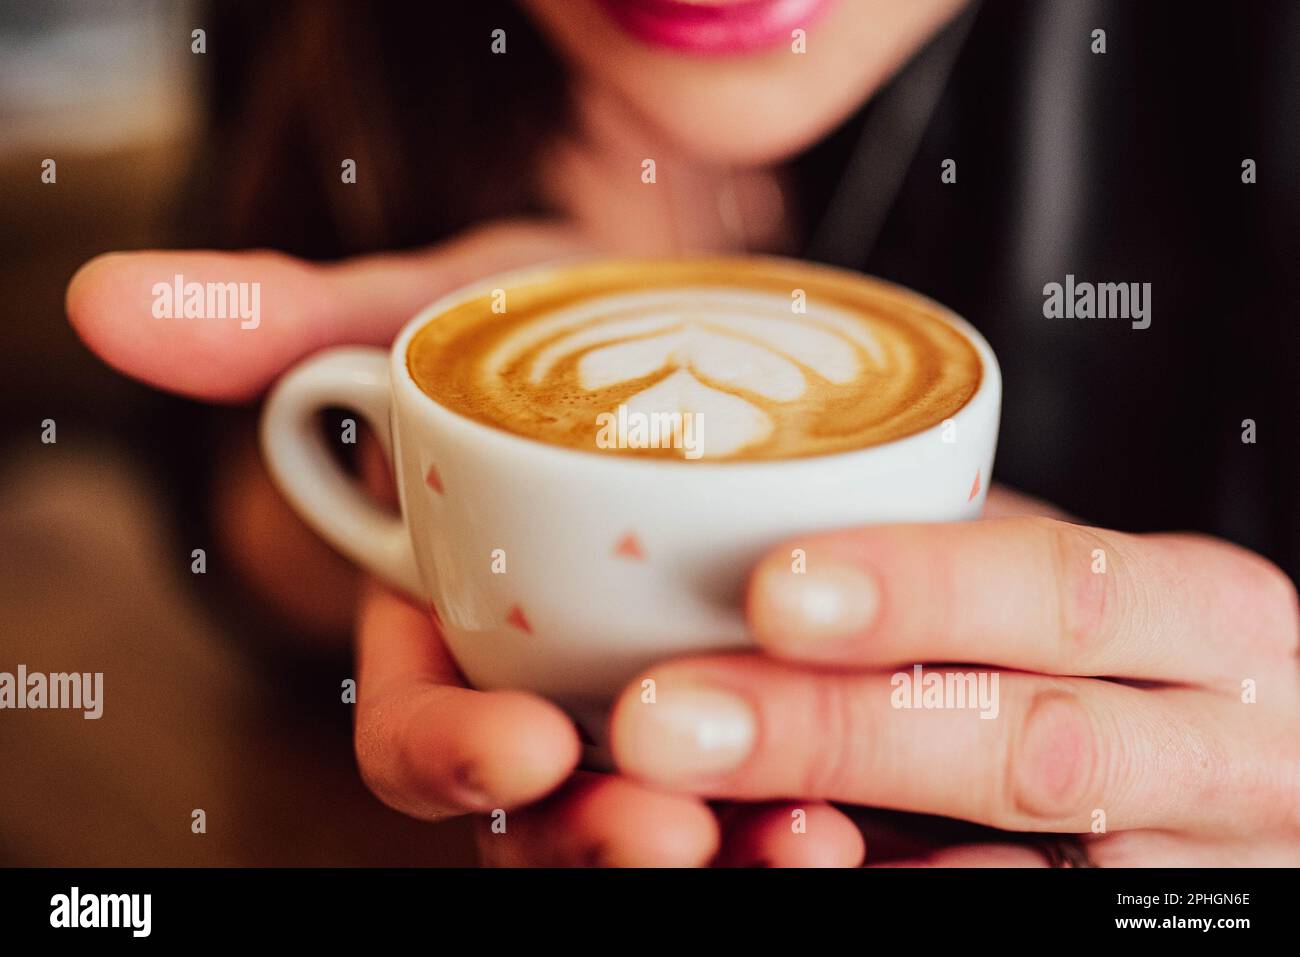 hands holding a white cup with coffee and latte art in a cafe, a woman and painted lips can be seen in the background Stock Photo